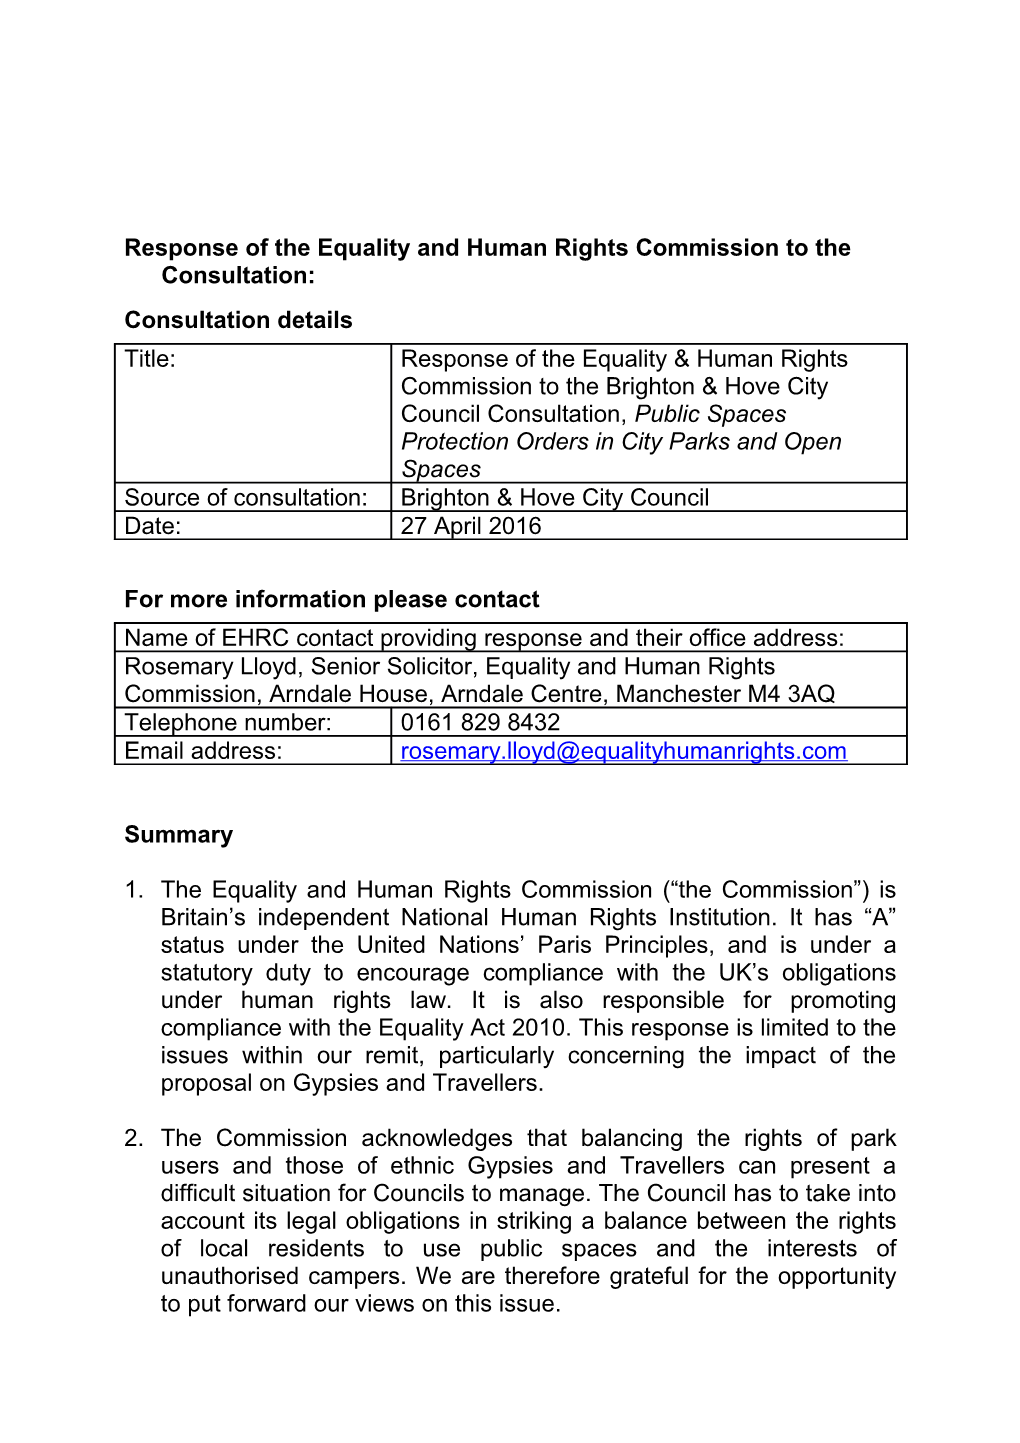 Response of the Equality and Human Rights Commission to the Consultation